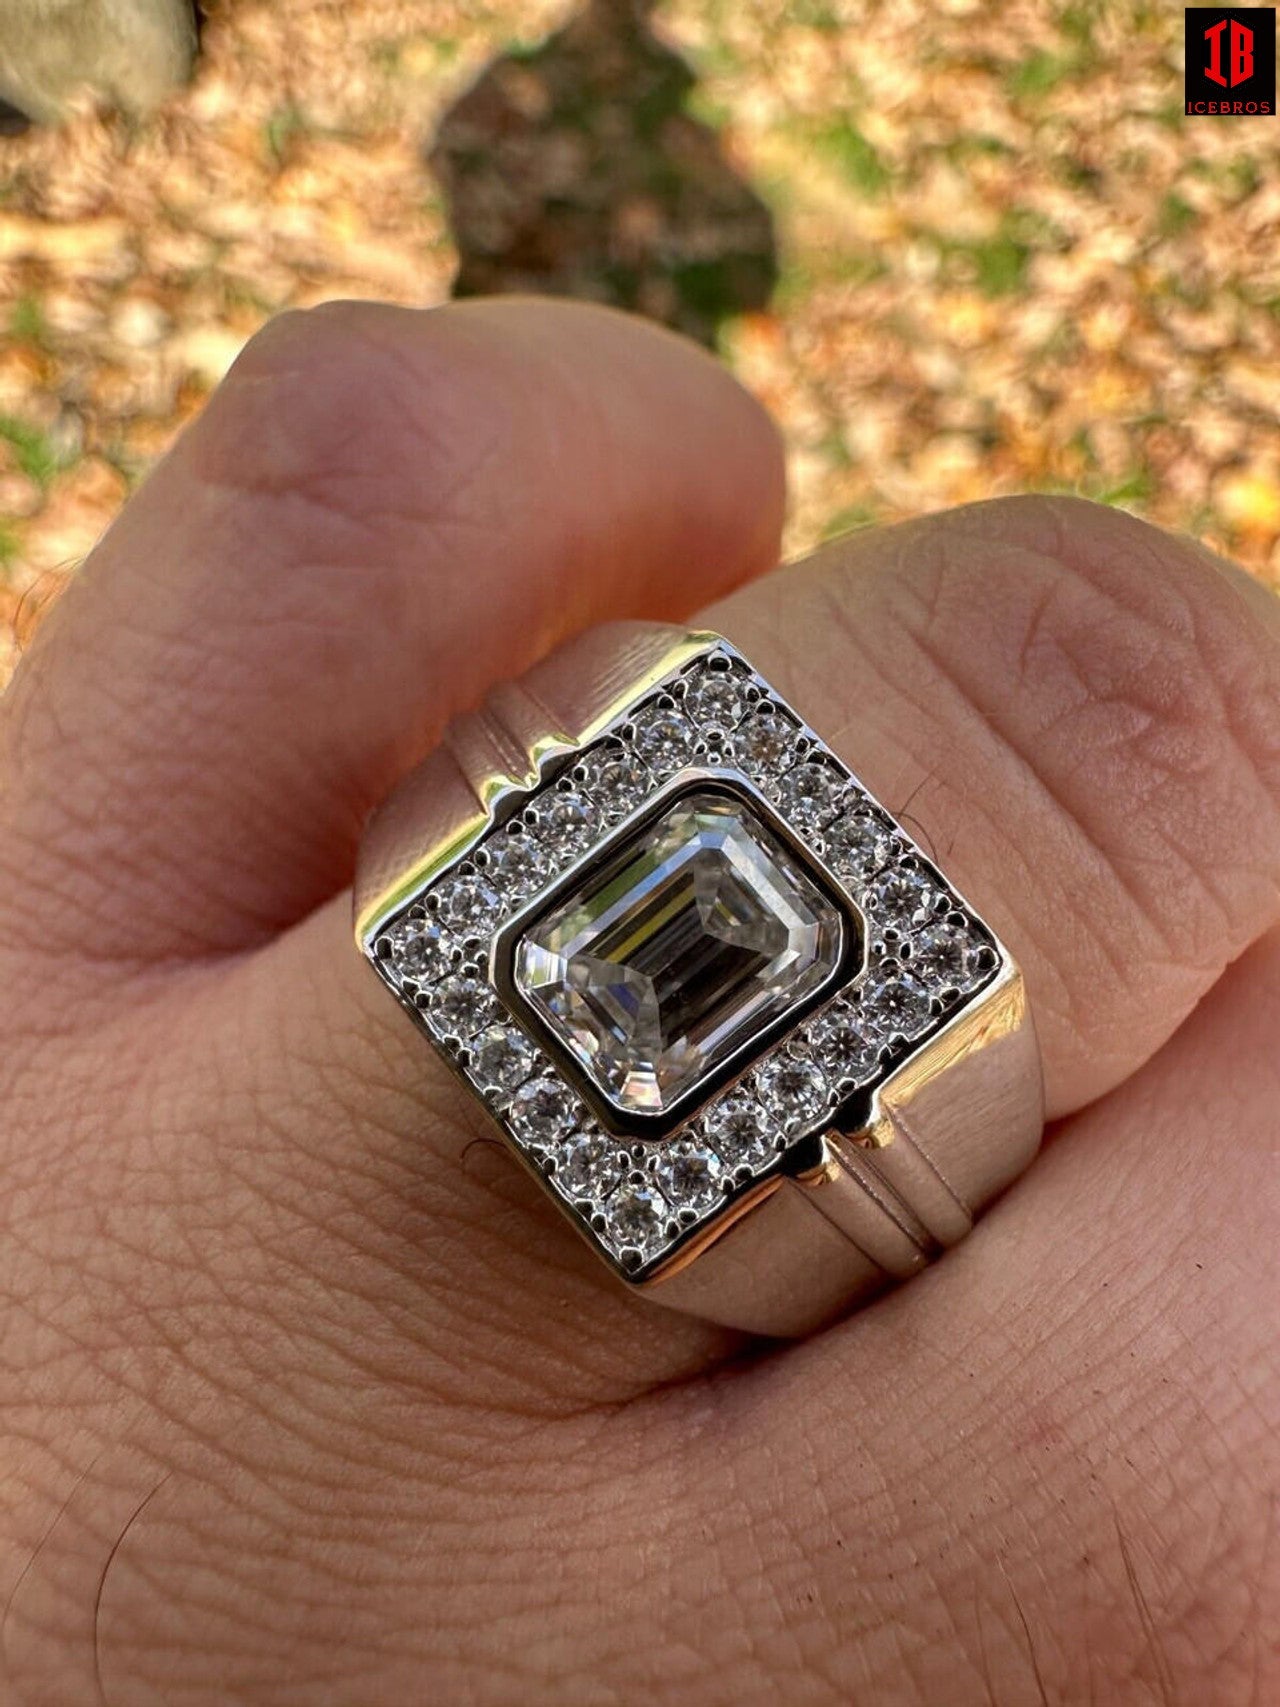 A Detailed View of  Men wearing beautiful Shinning White Gold Emerald-cut Moissanite Ring  on His hand